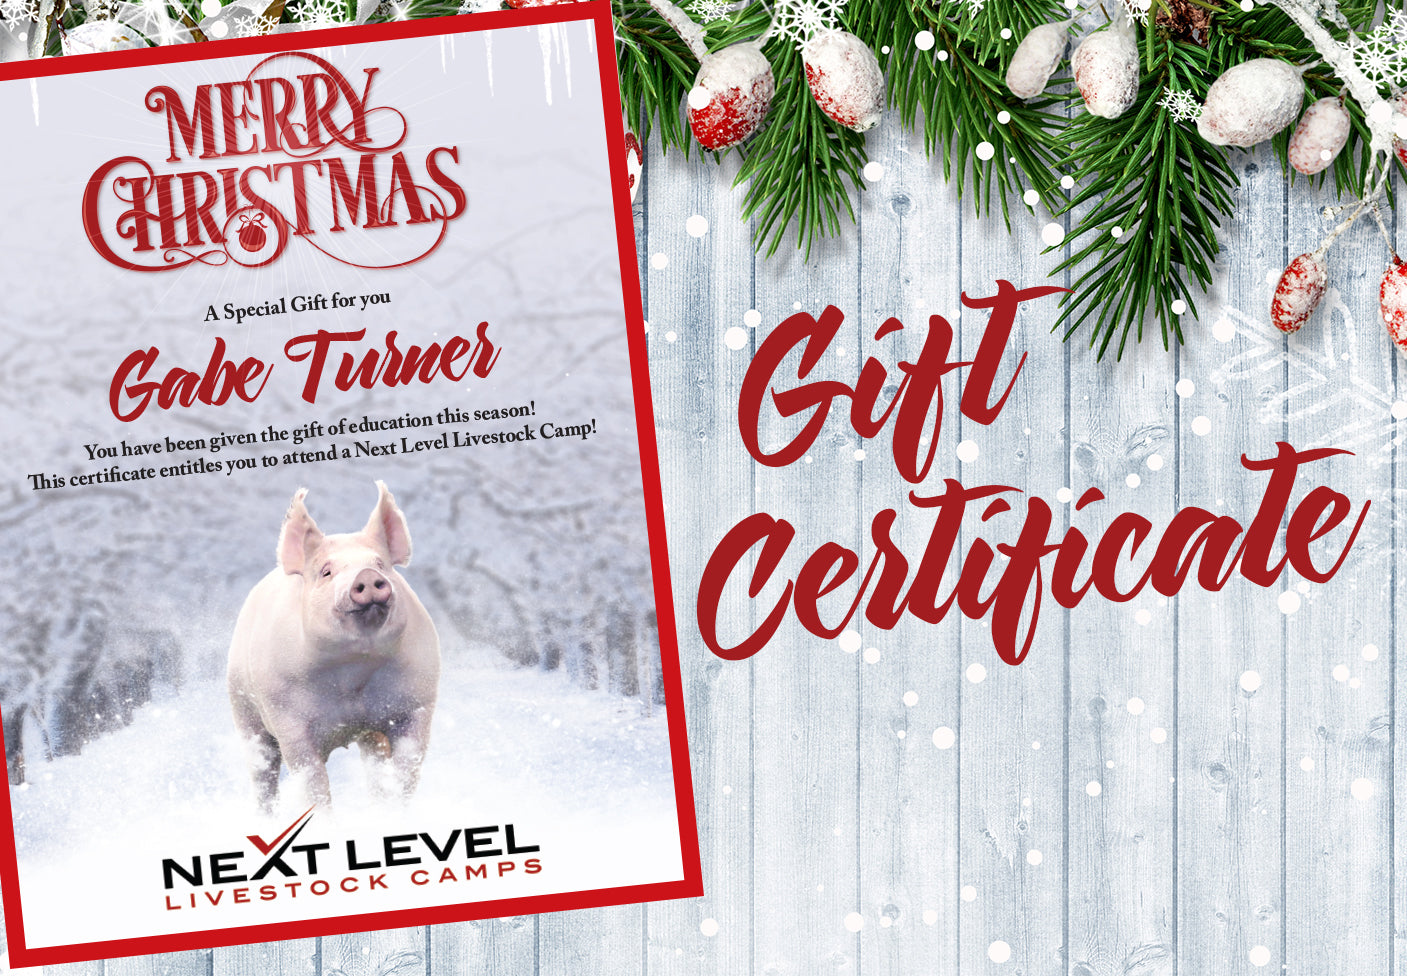 NEXT LEVEL LIVESTOCK CAMPS GIFT CERTIFICATE